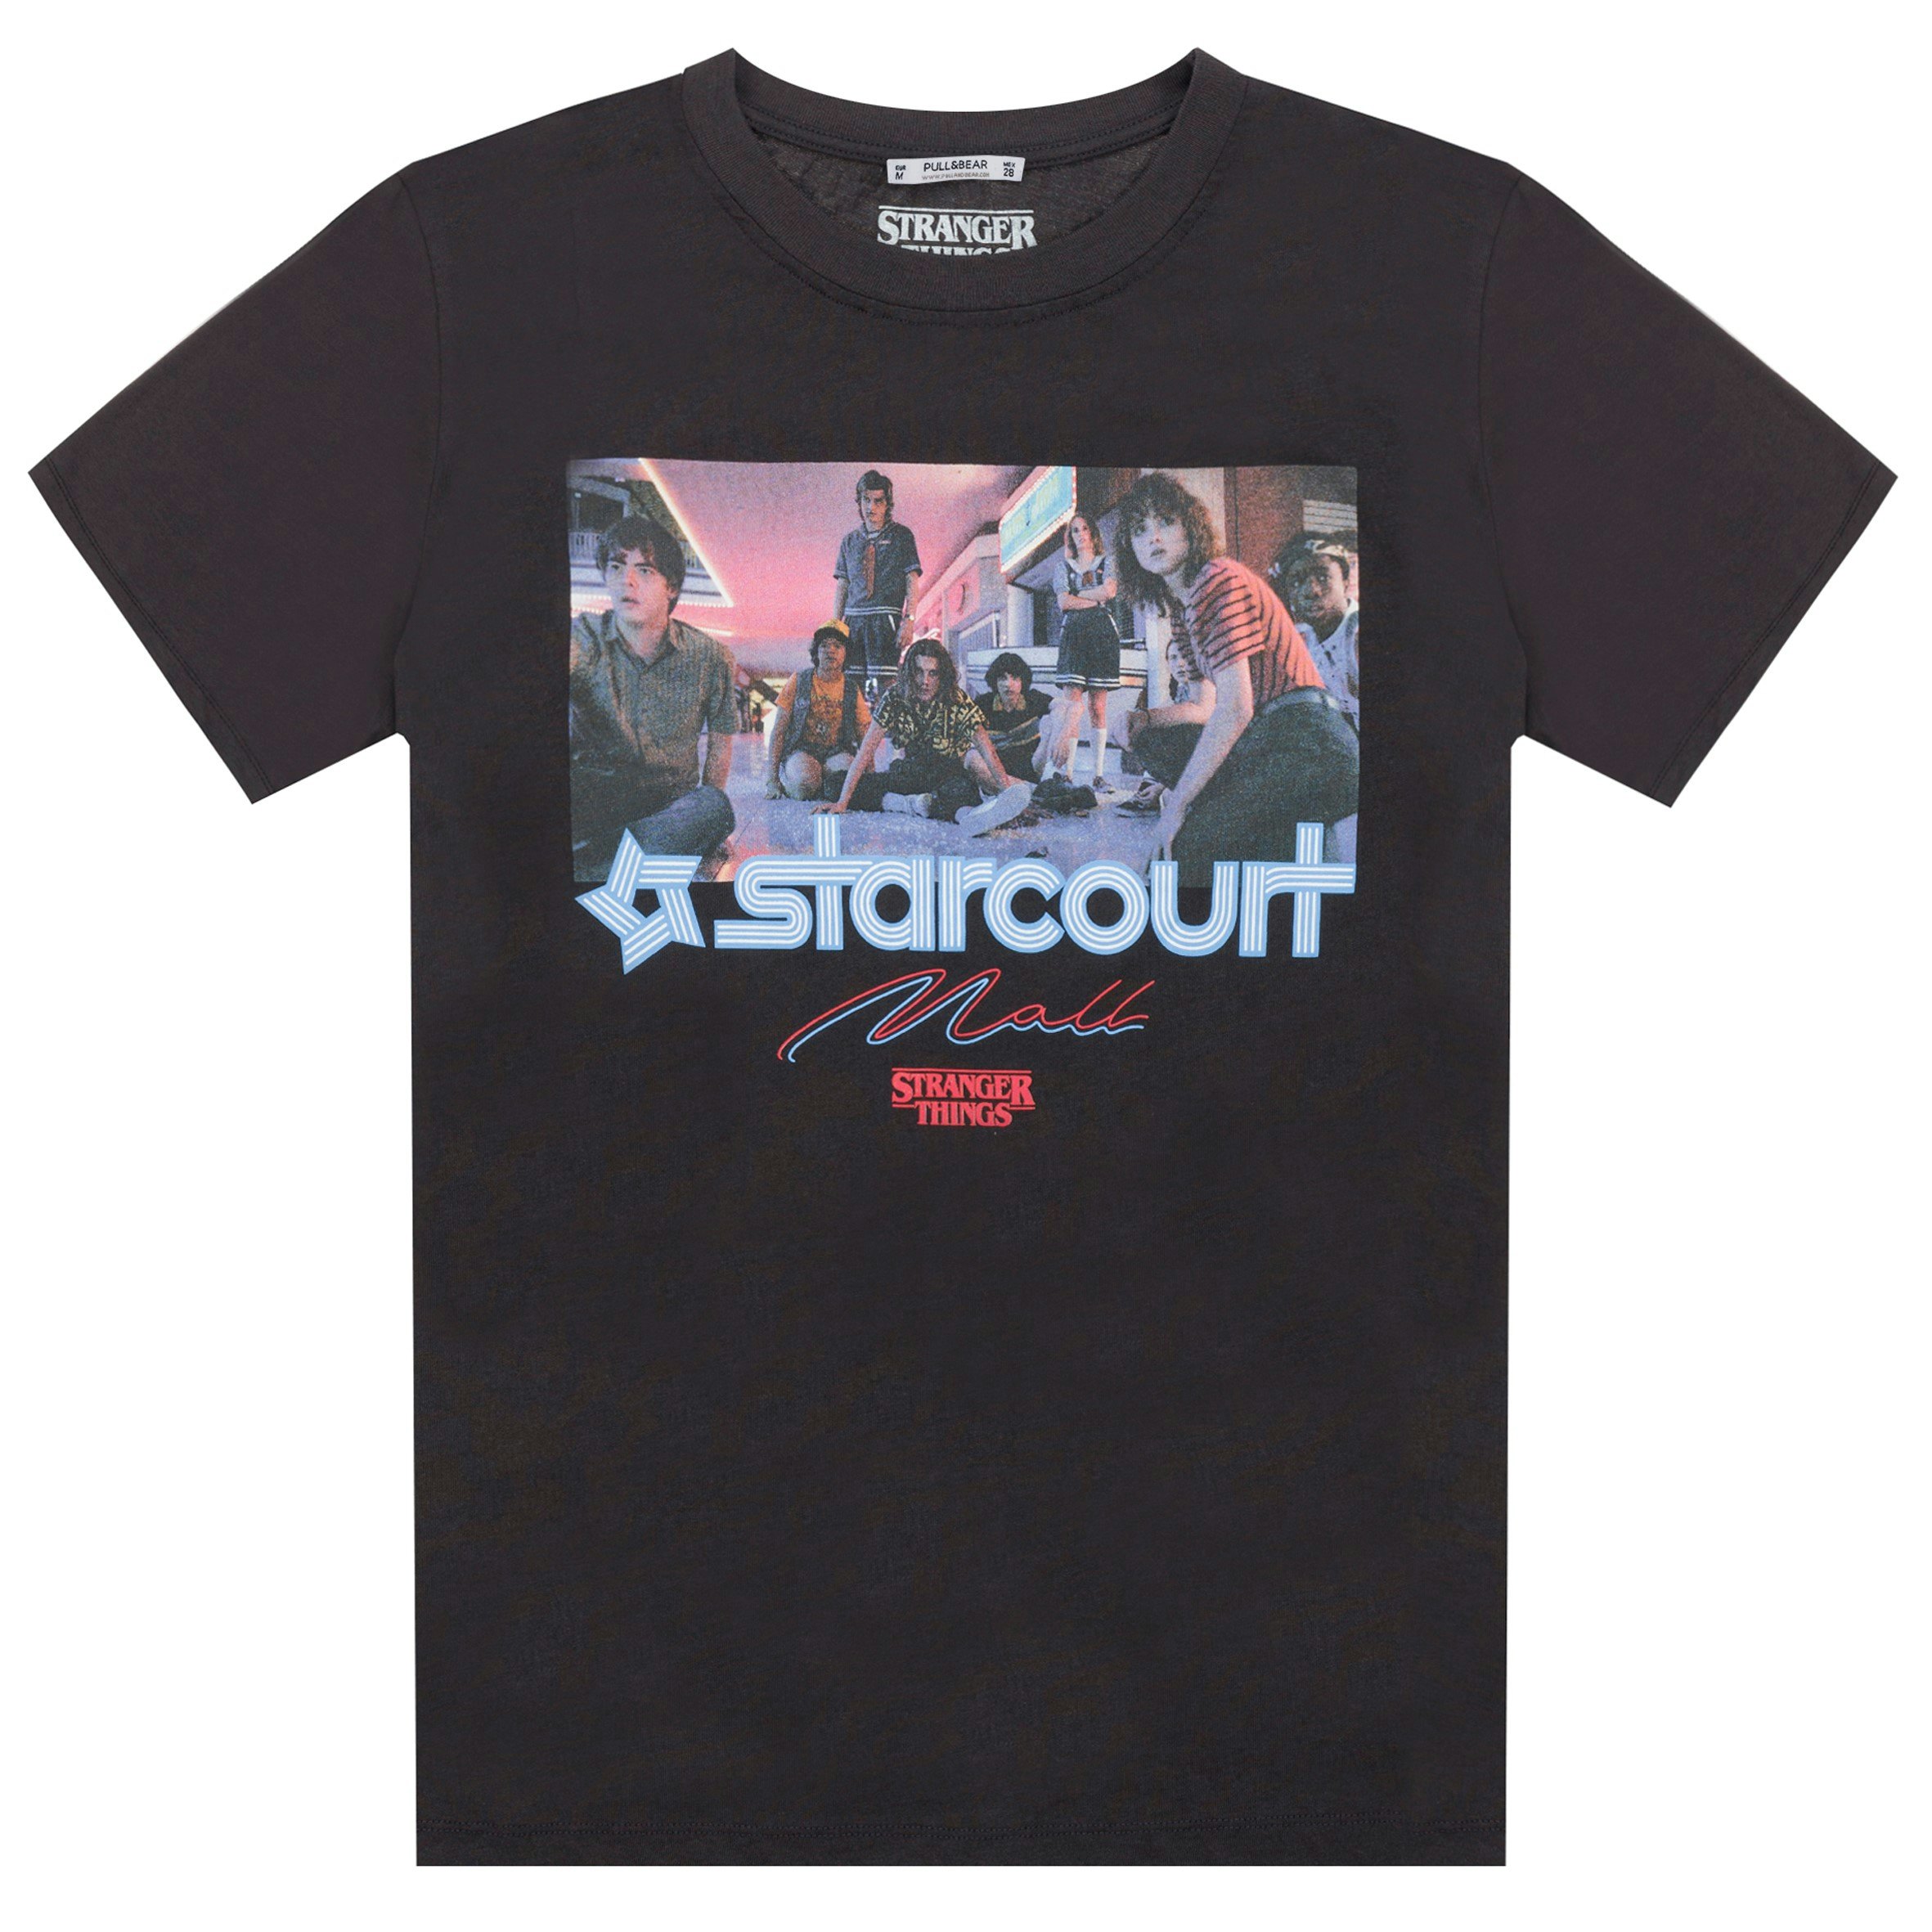 This Pull Bear Stranger Things T Shirt Collection Features An